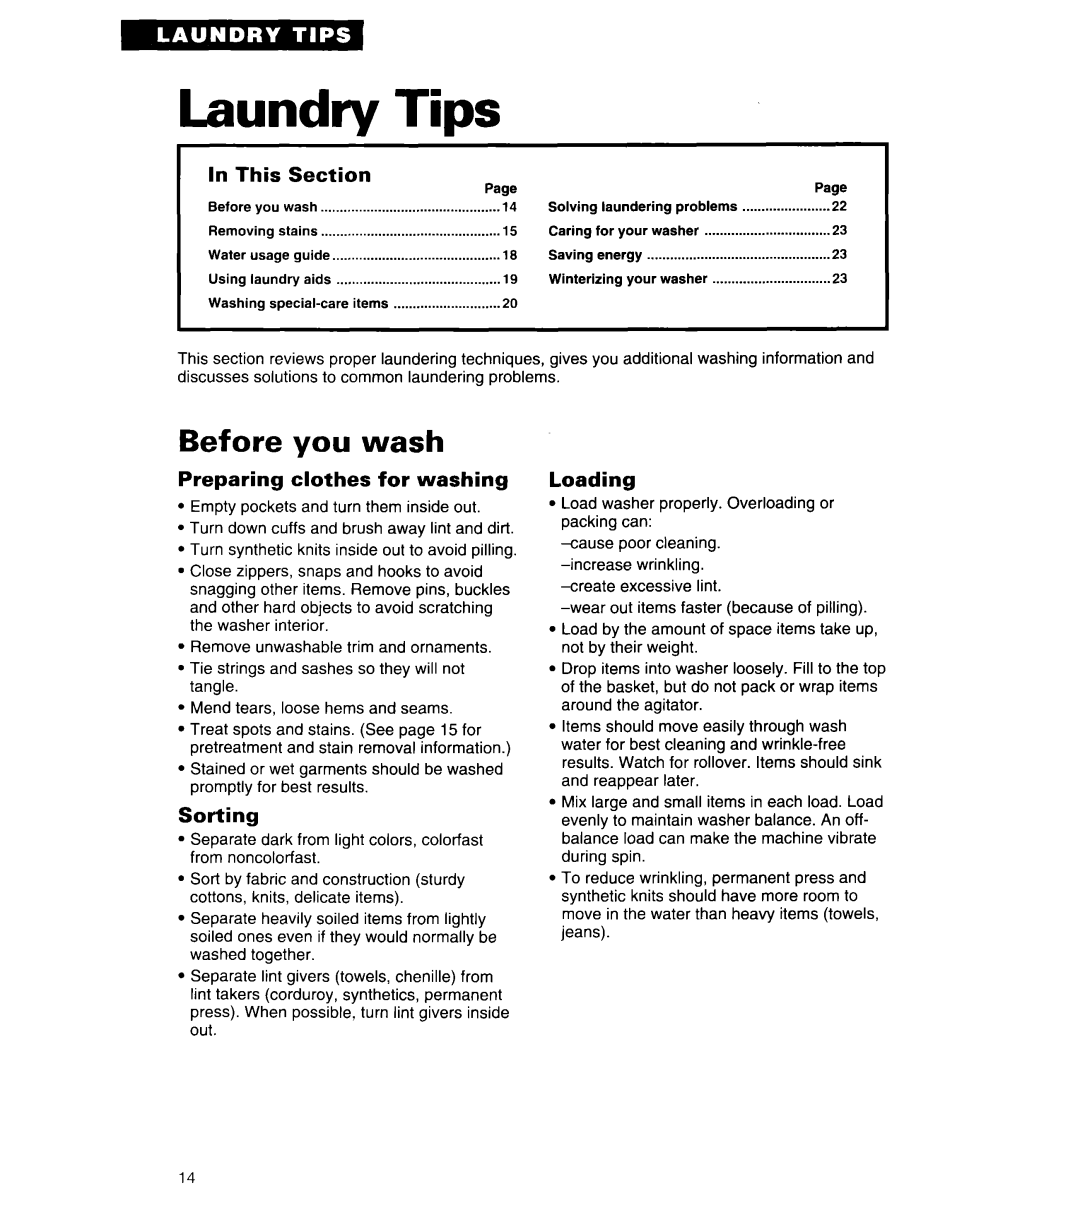 Whirlpool 3360461 warranty Laundry Tips, Before you wash, Preparing clothes for washing, Sorting, Loading, In This, Section 